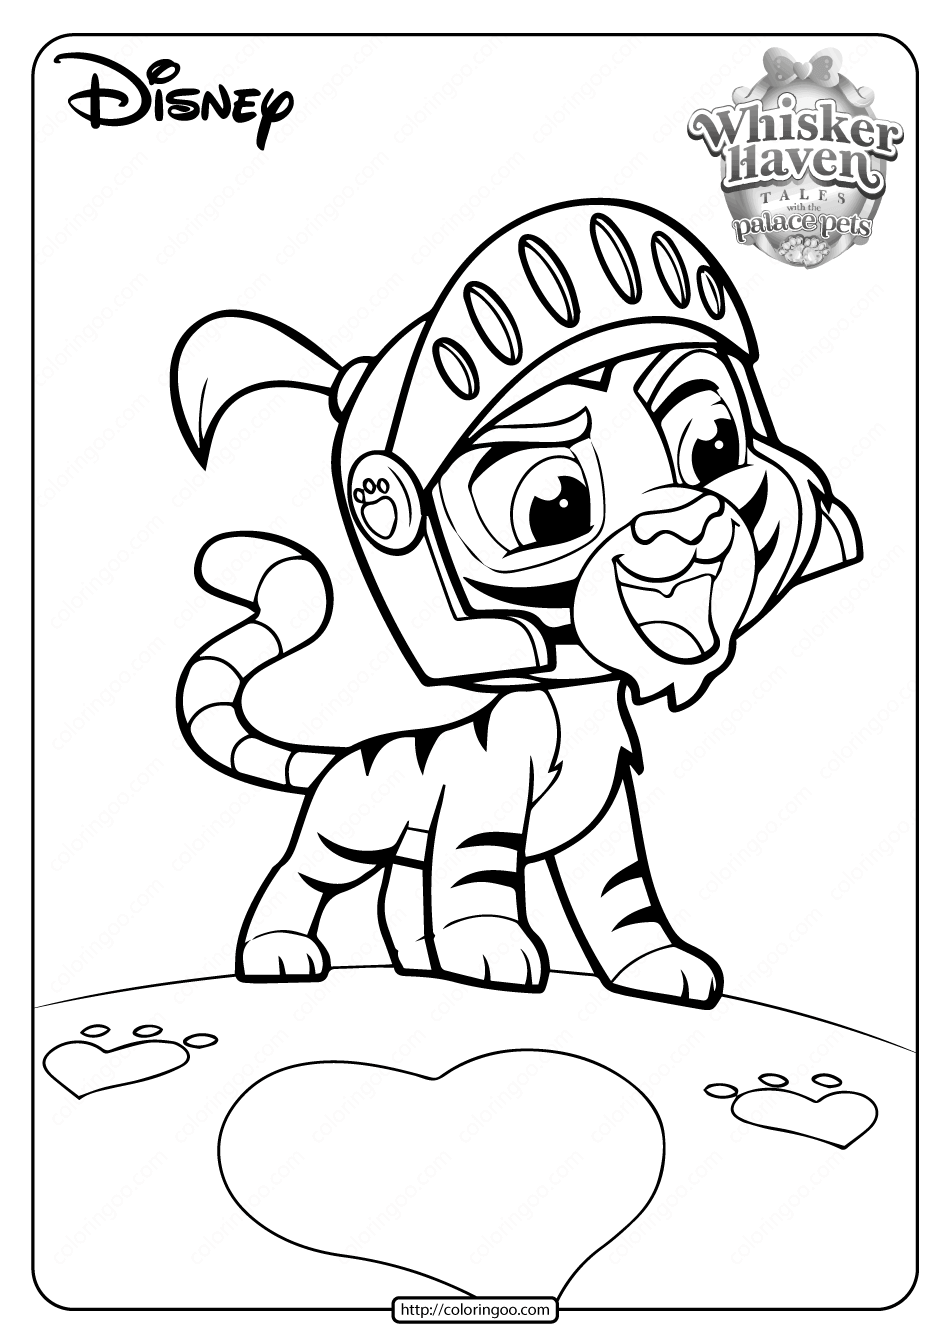 Printable Whisker Haven Palace Pets Coloring Pages